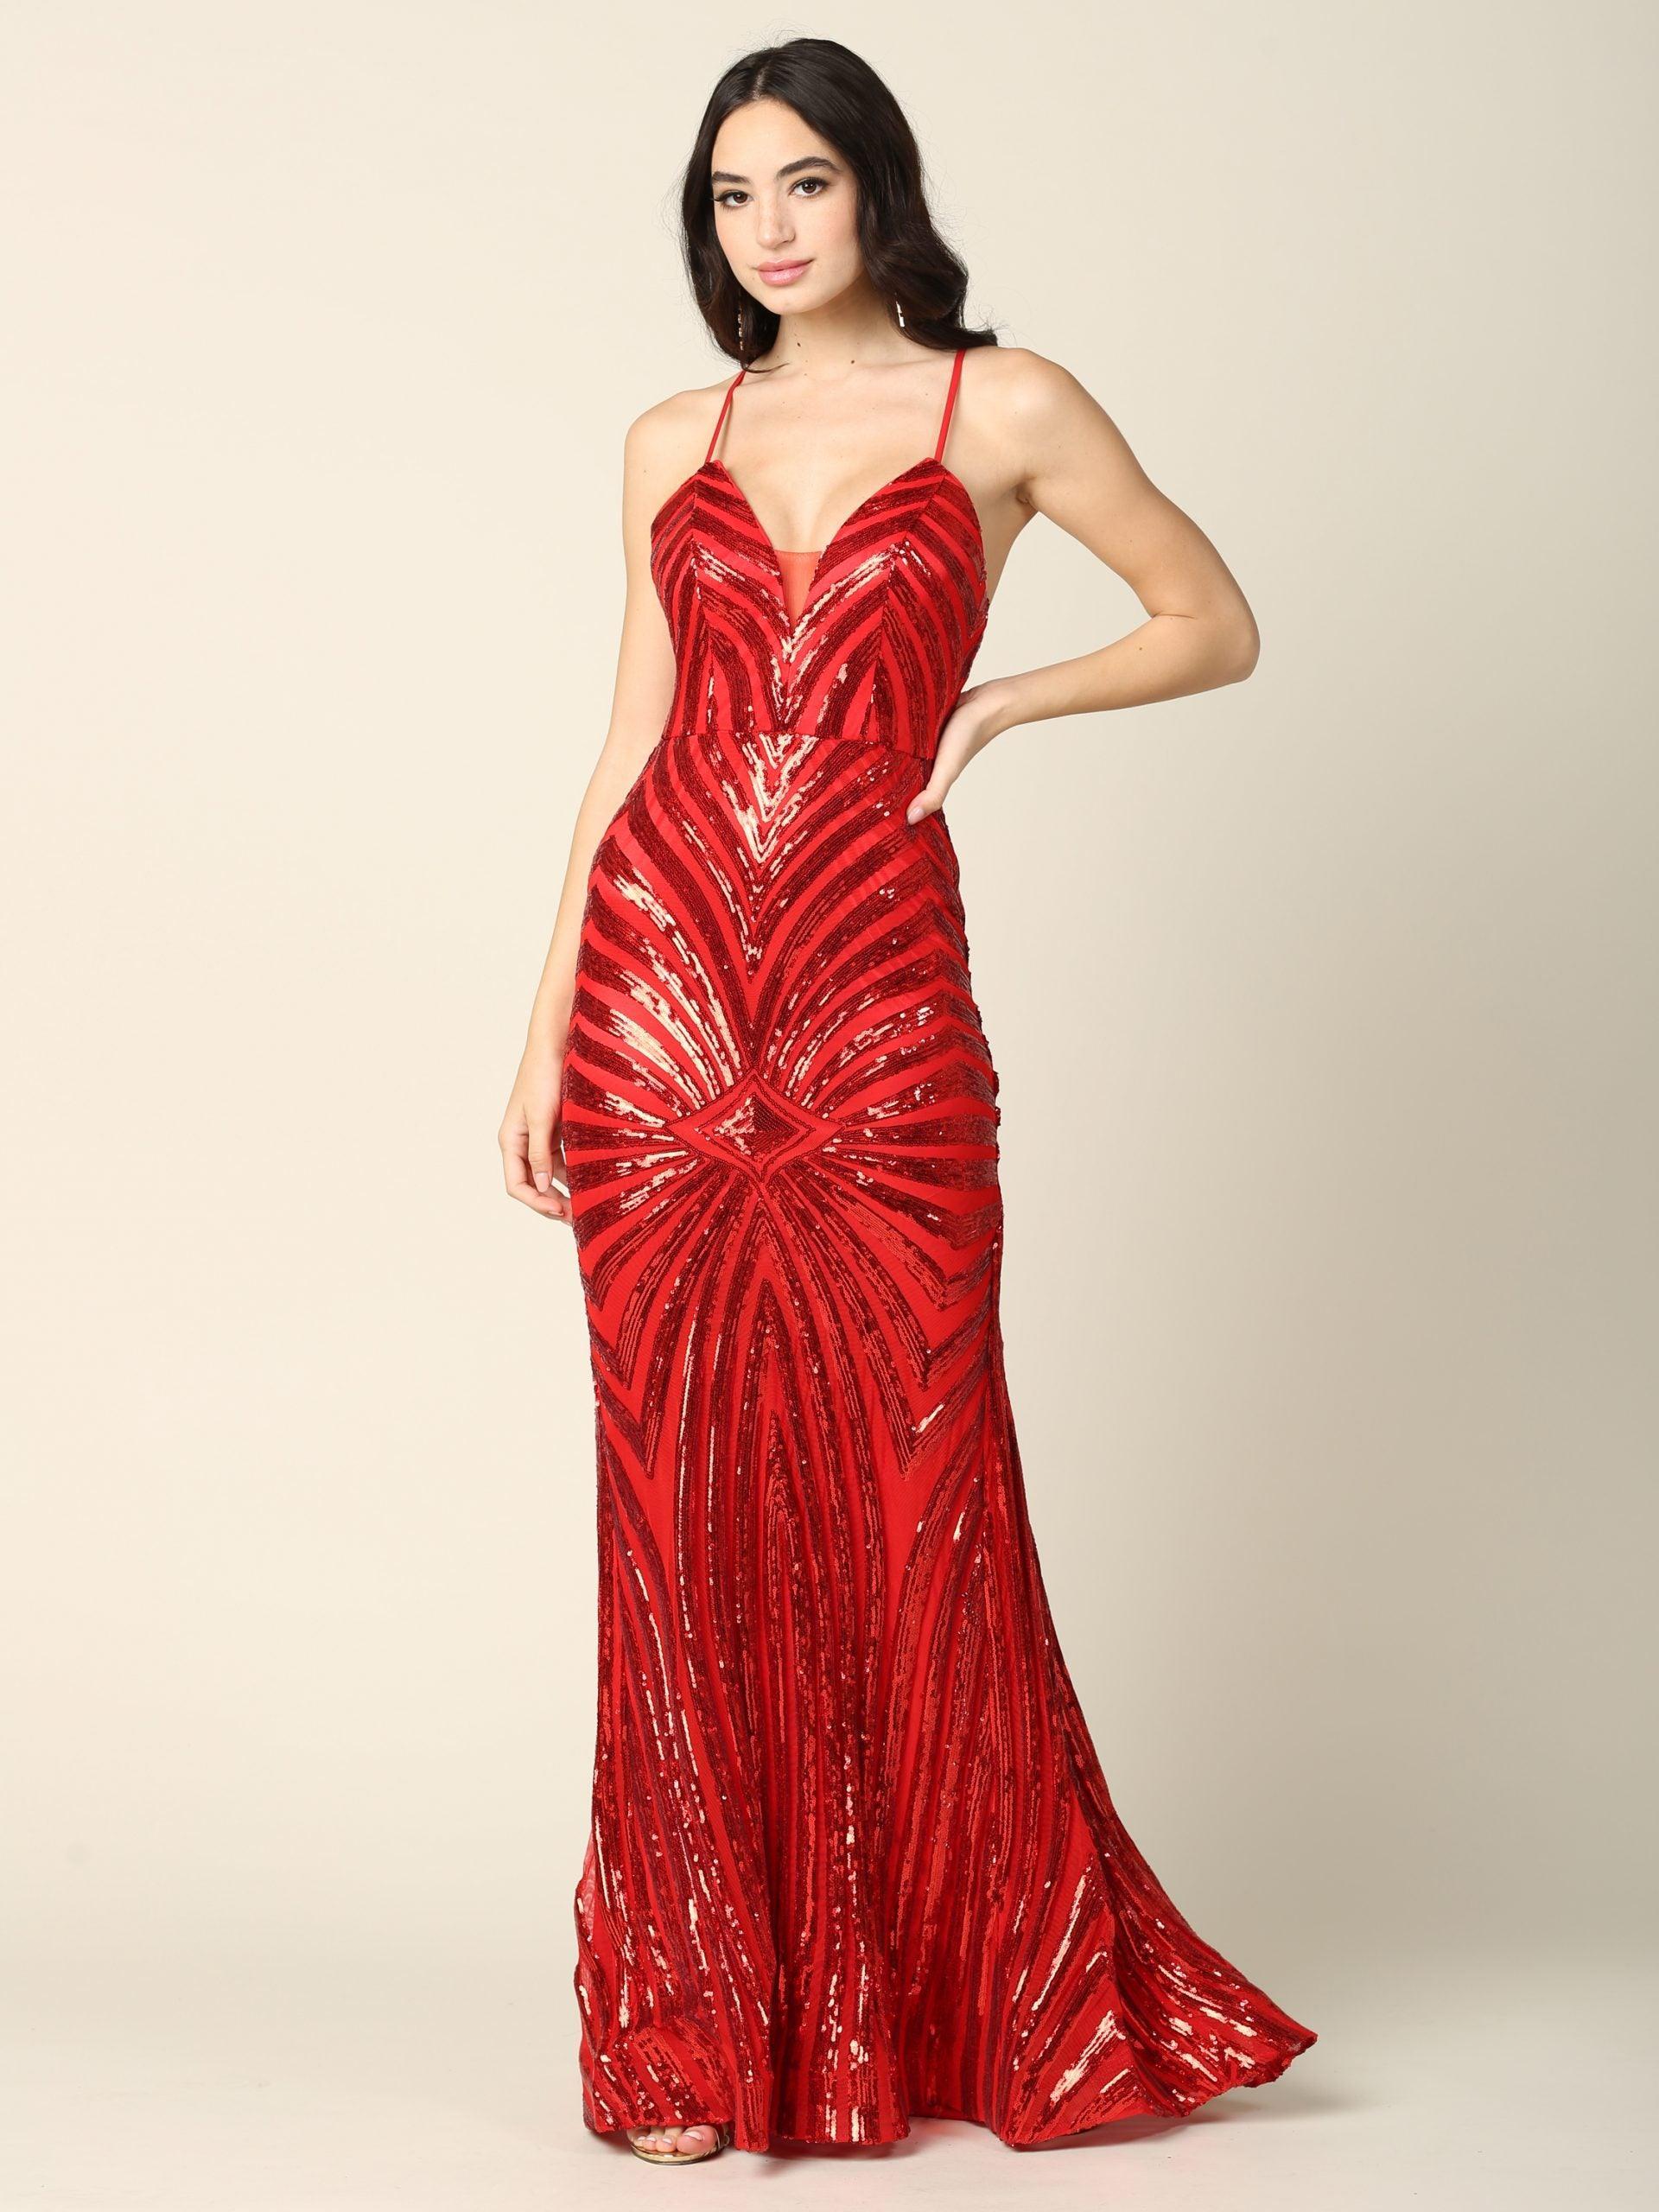 Long Formal Spaghetti Strap Sequins Prom Dress Sale - The Dress Outlet